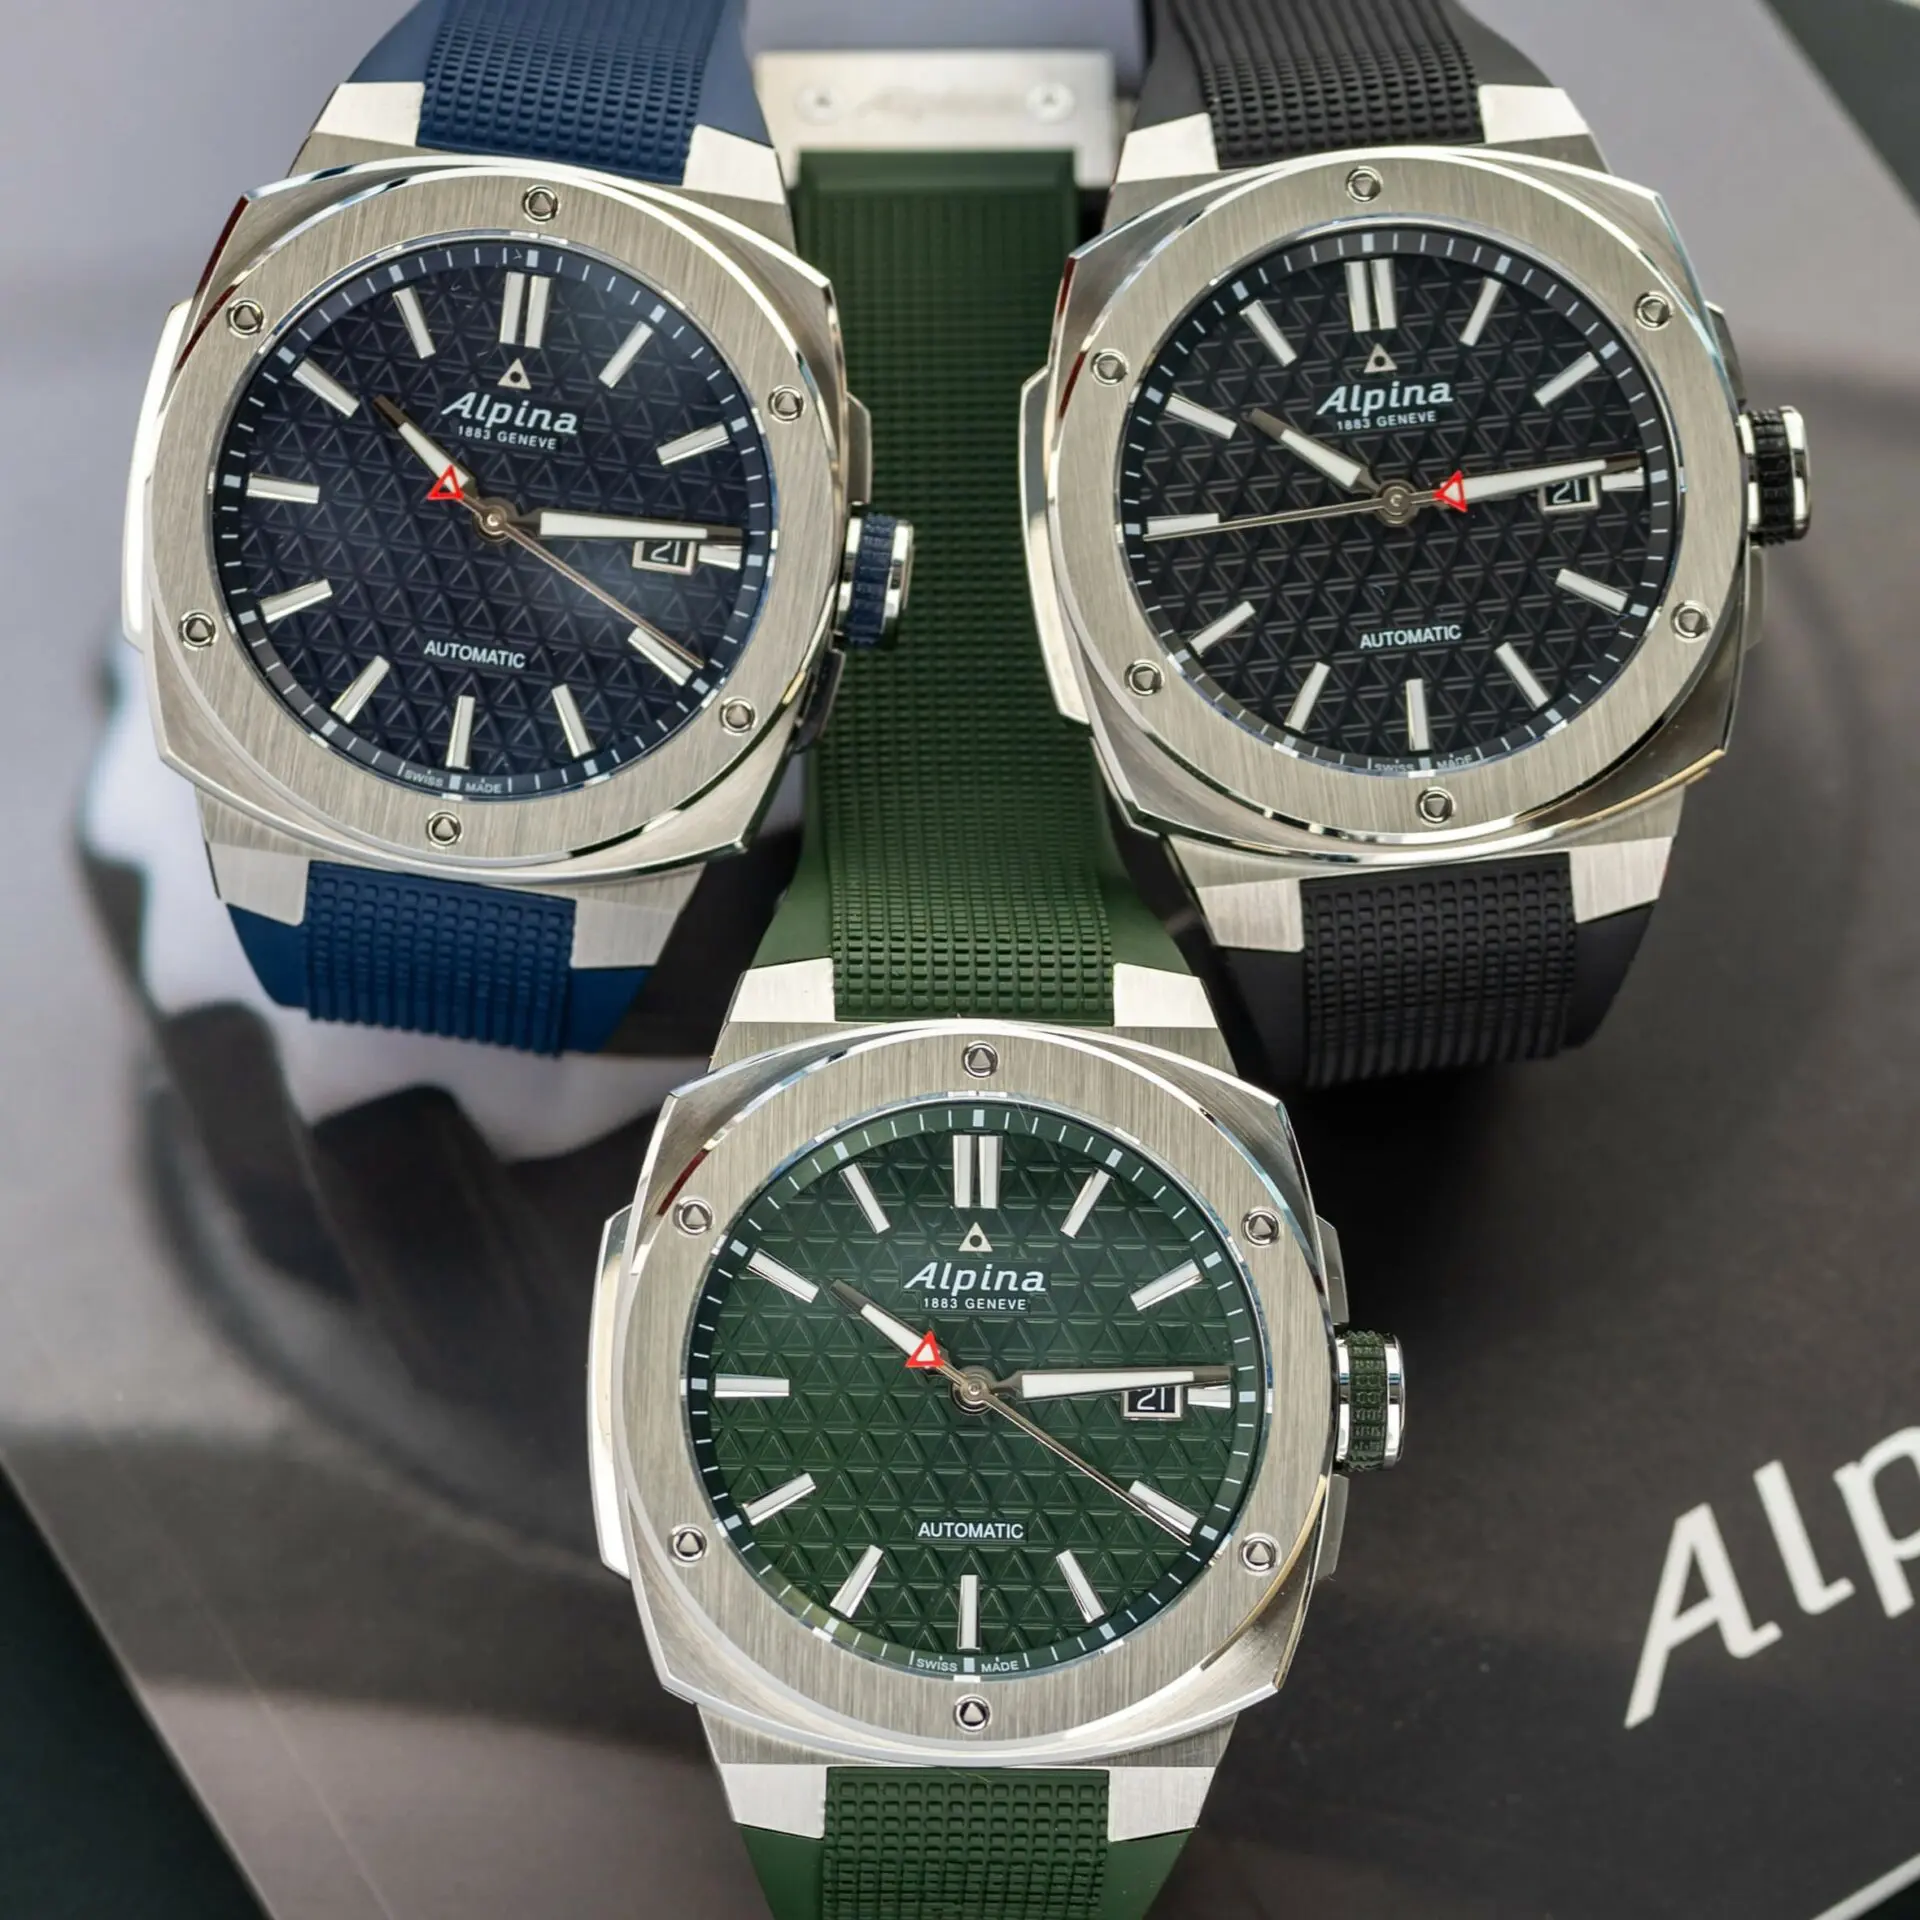 Test your limits with the new Alpina Alpiner Extreme Automatic